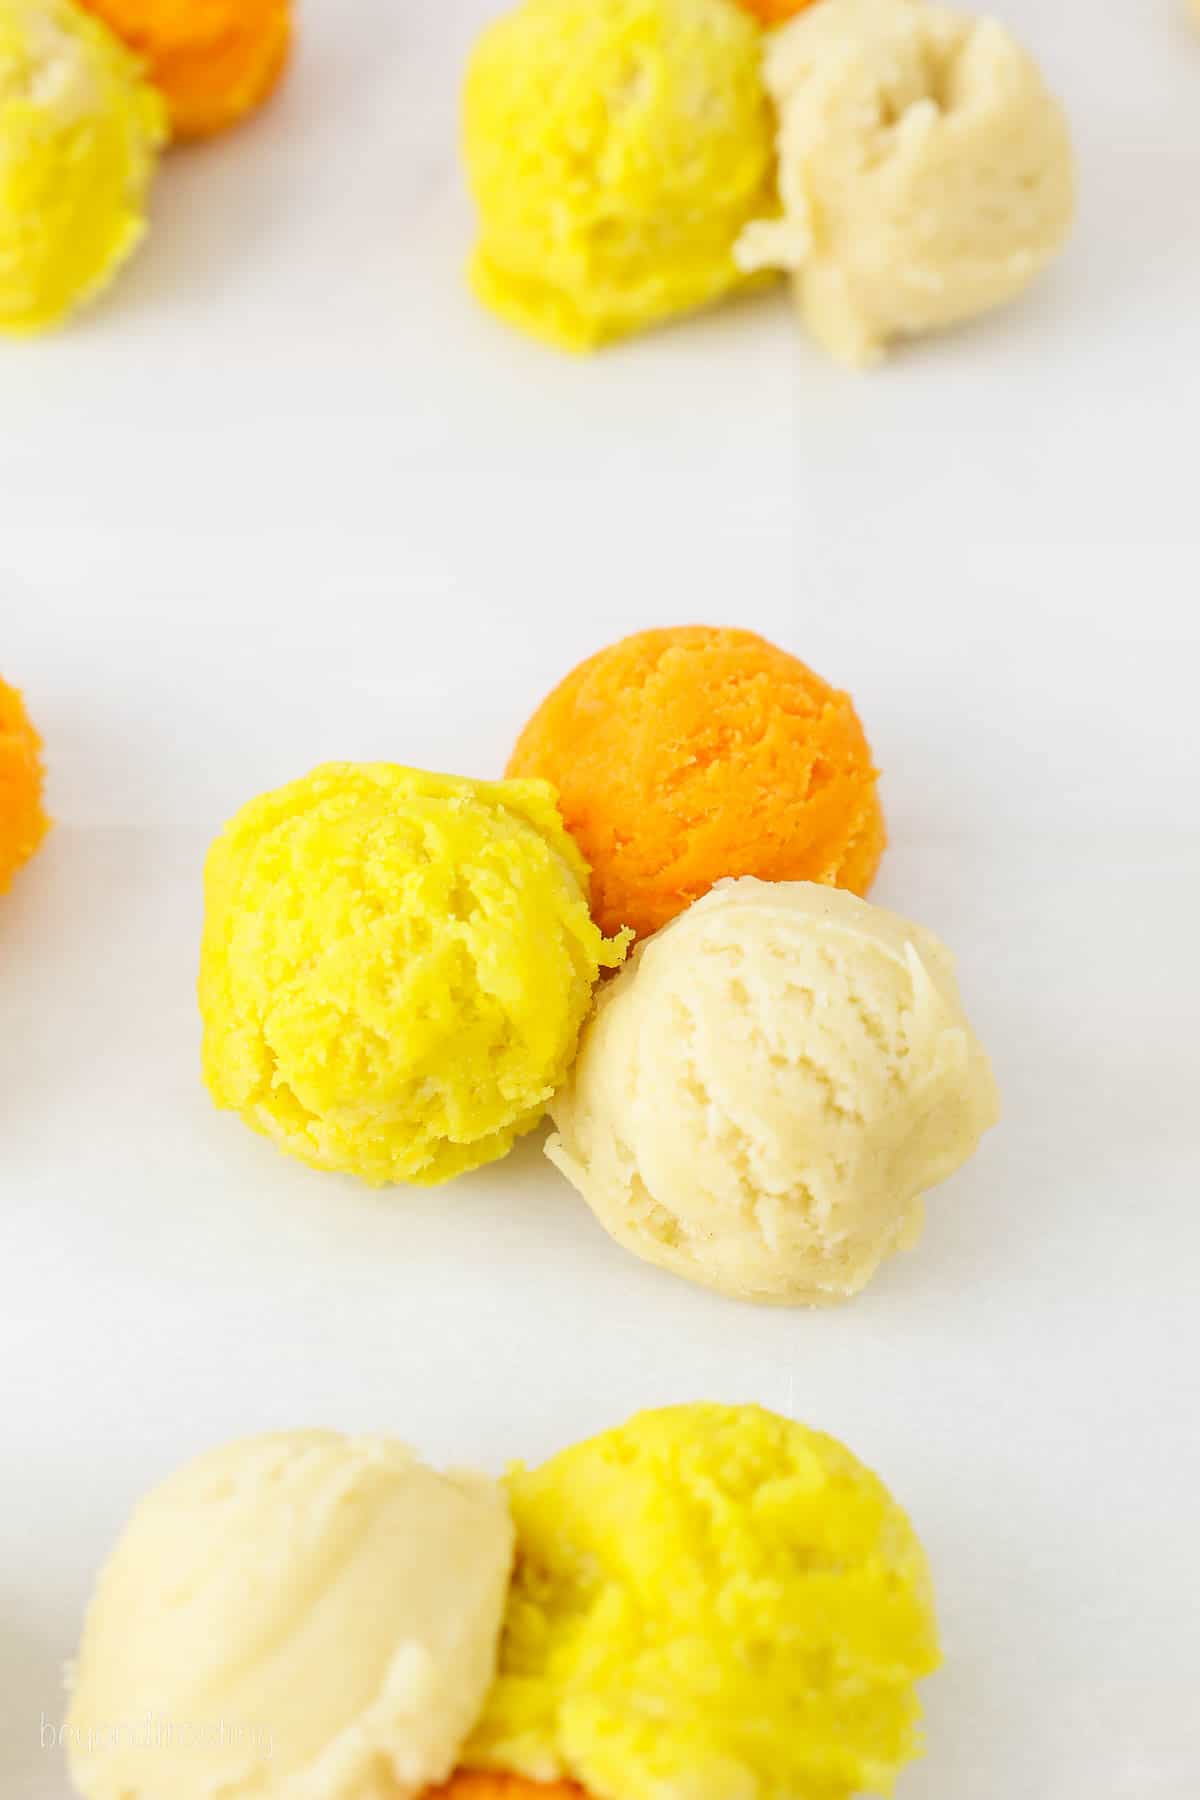 3 scoops of cookie dough color white, yellow and orange.